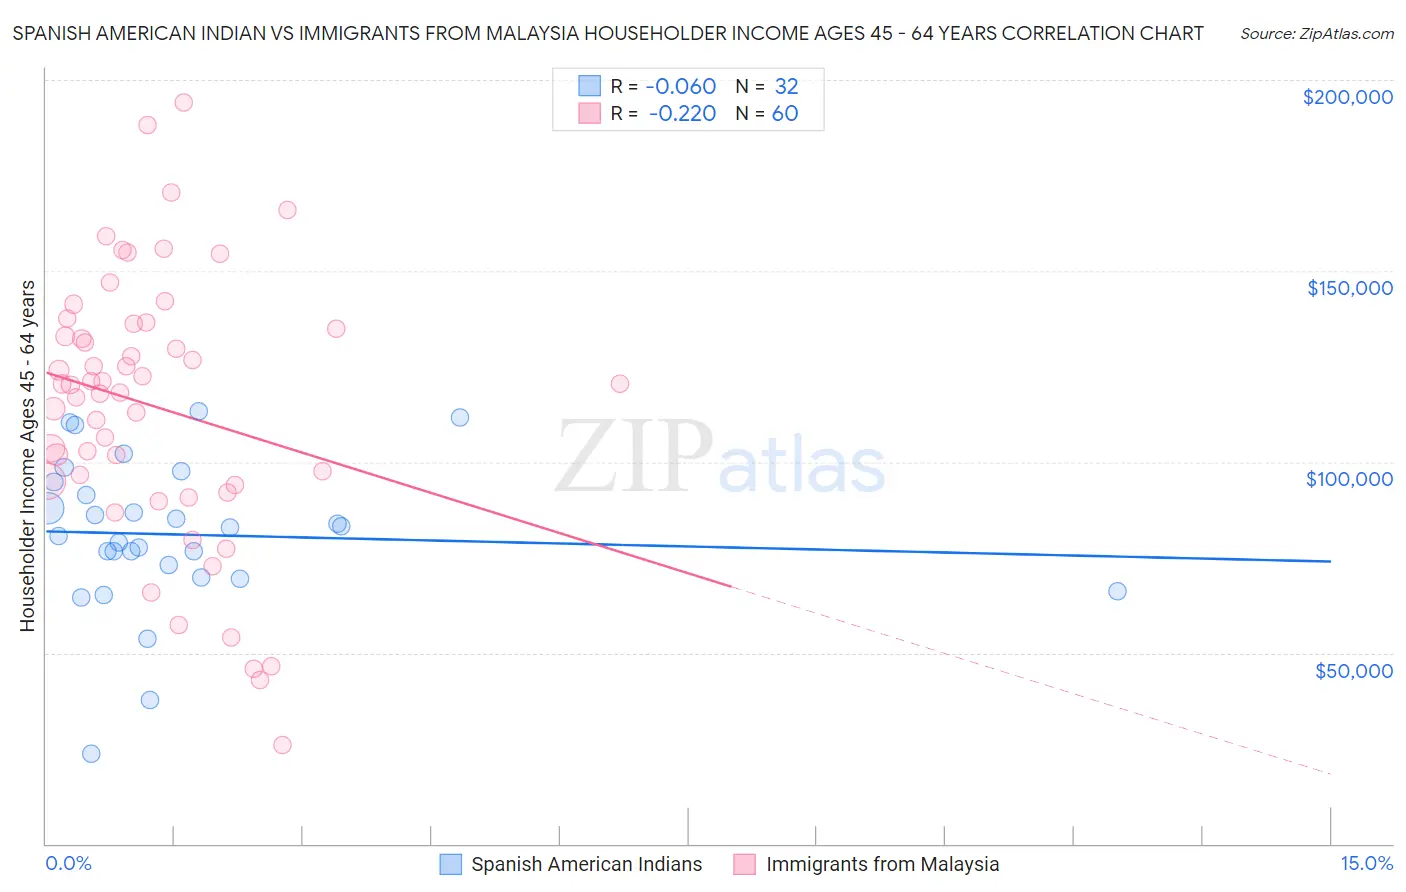 Spanish American Indian vs Immigrants from Malaysia Householder Income Ages 45 - 64 years